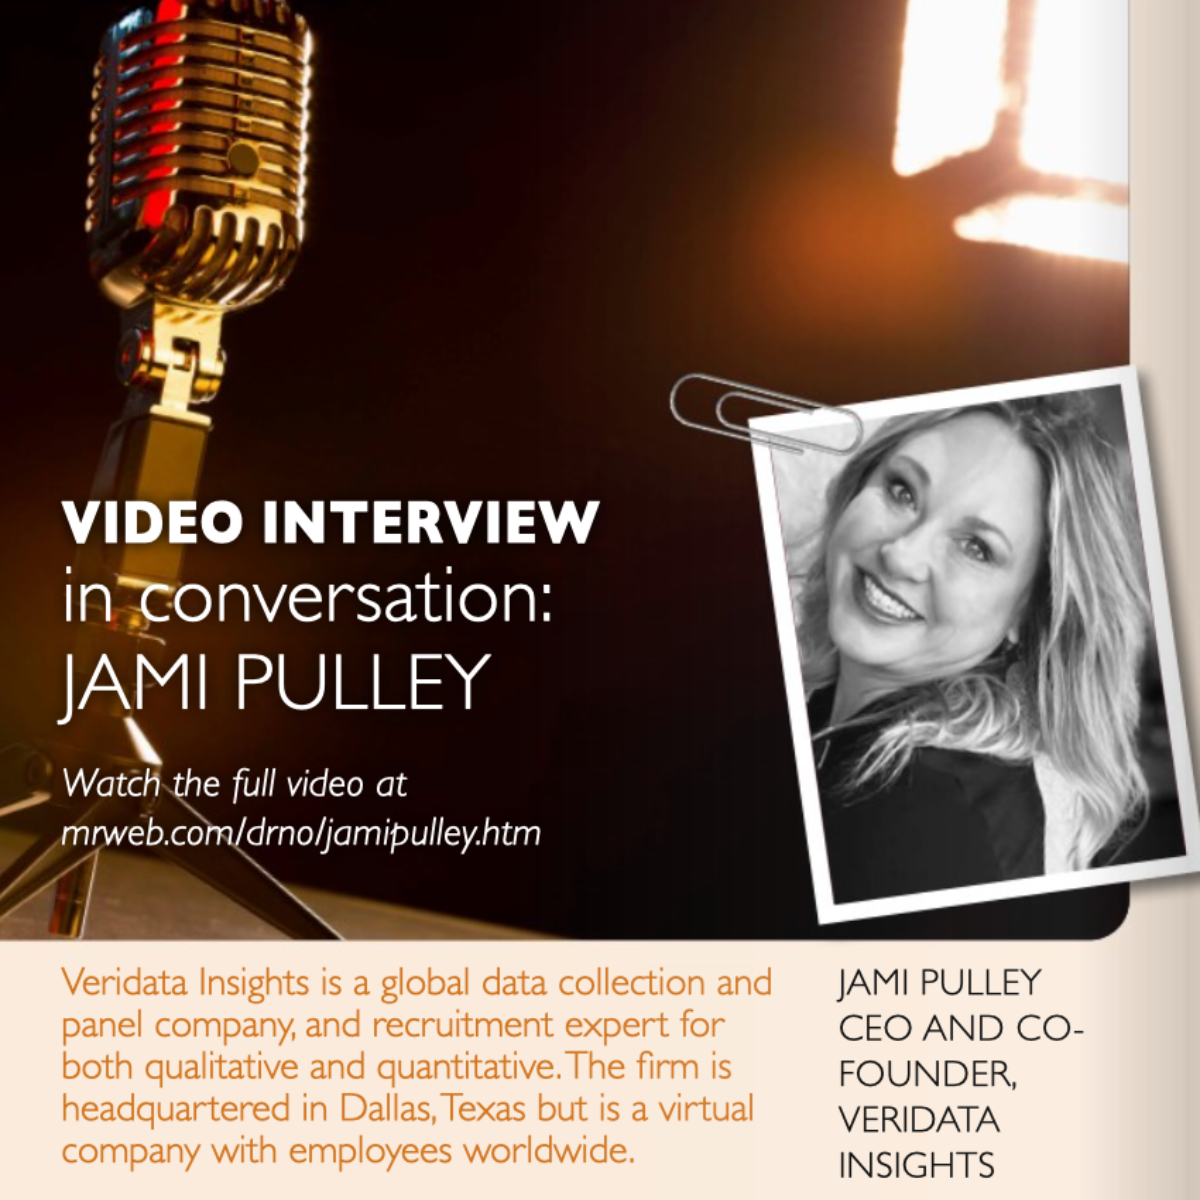 Veridata Insights CEO, Jami Pulley, is delighted to have been interviewed by Daily Research News’ Nick Thomas.